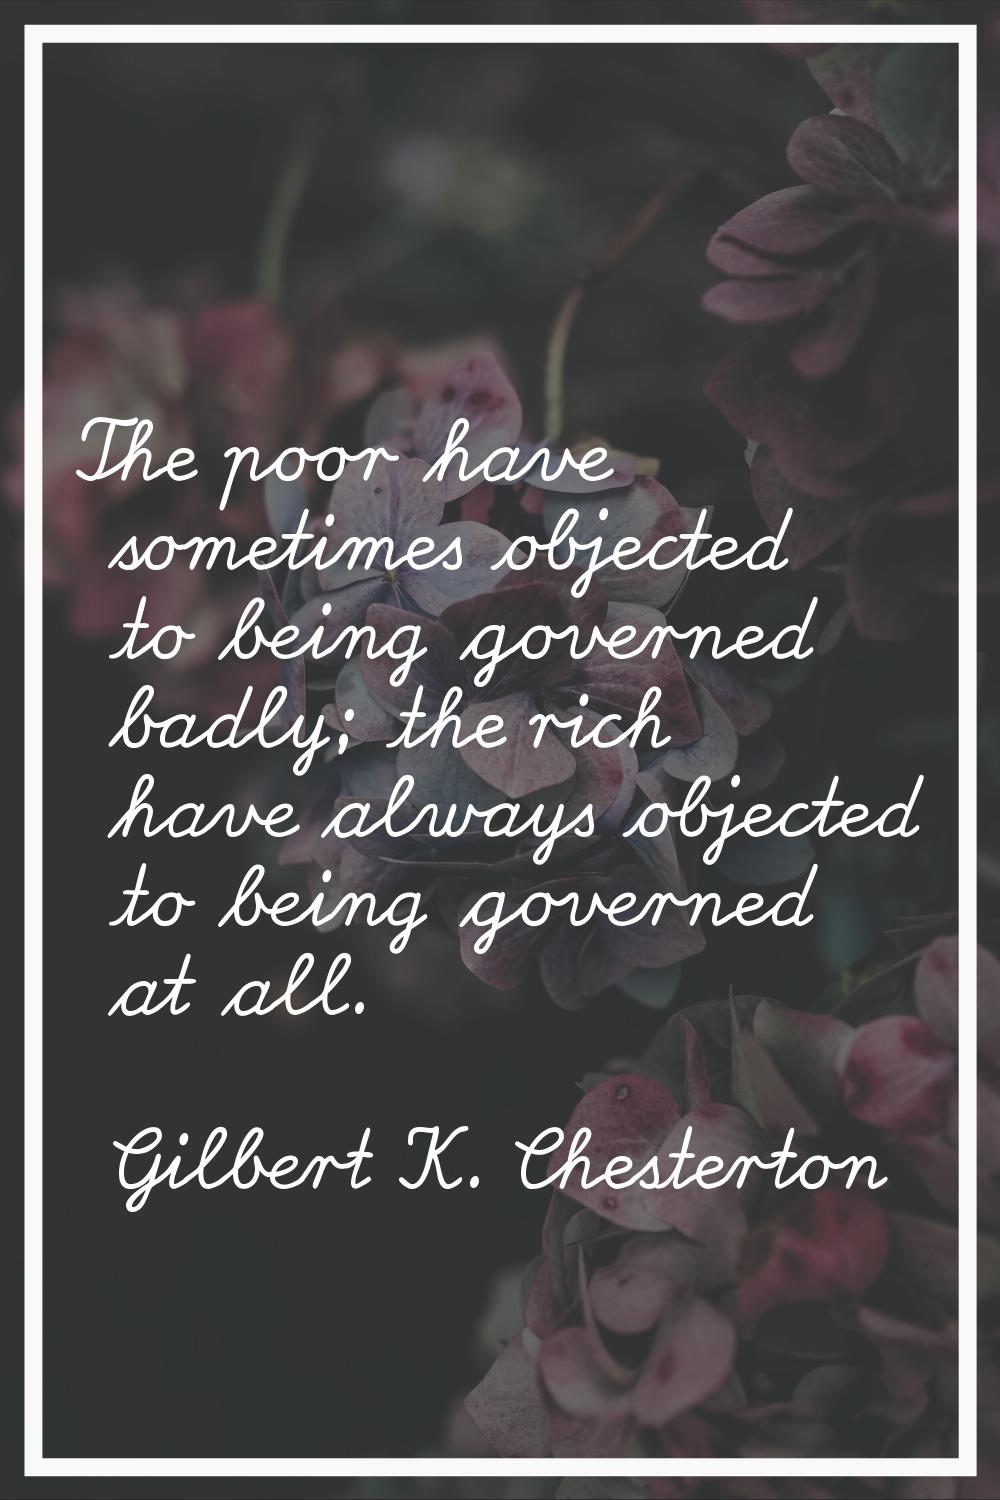 The poor have sometimes objected to being governed badly; the rich have always objected to being go